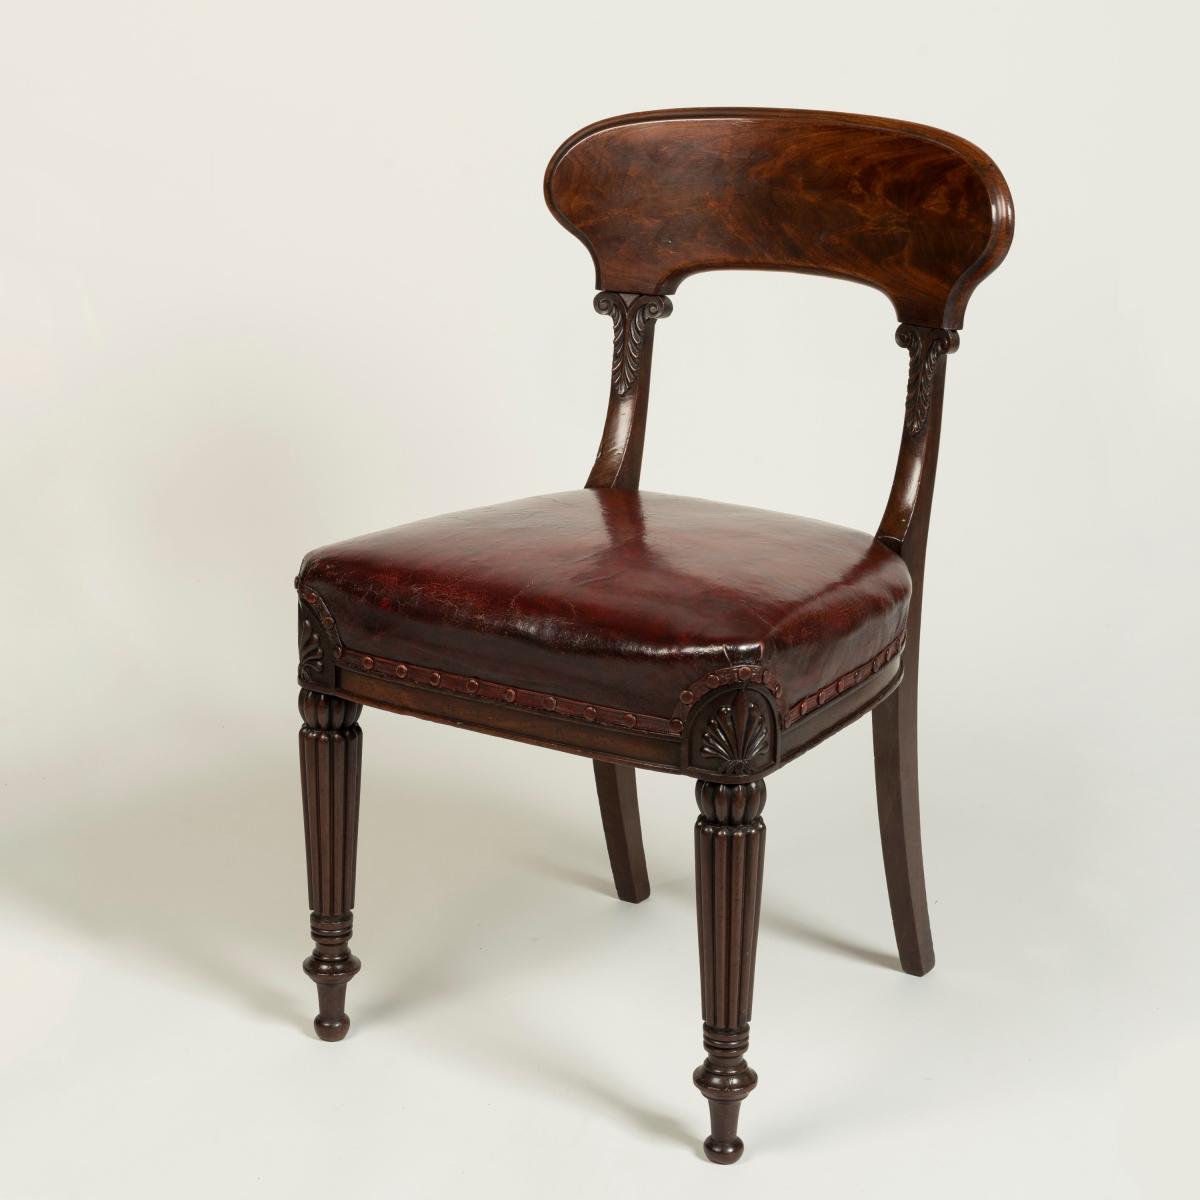 A Fine set of Twelve George IV Dining Chairs Attributed to Gillows